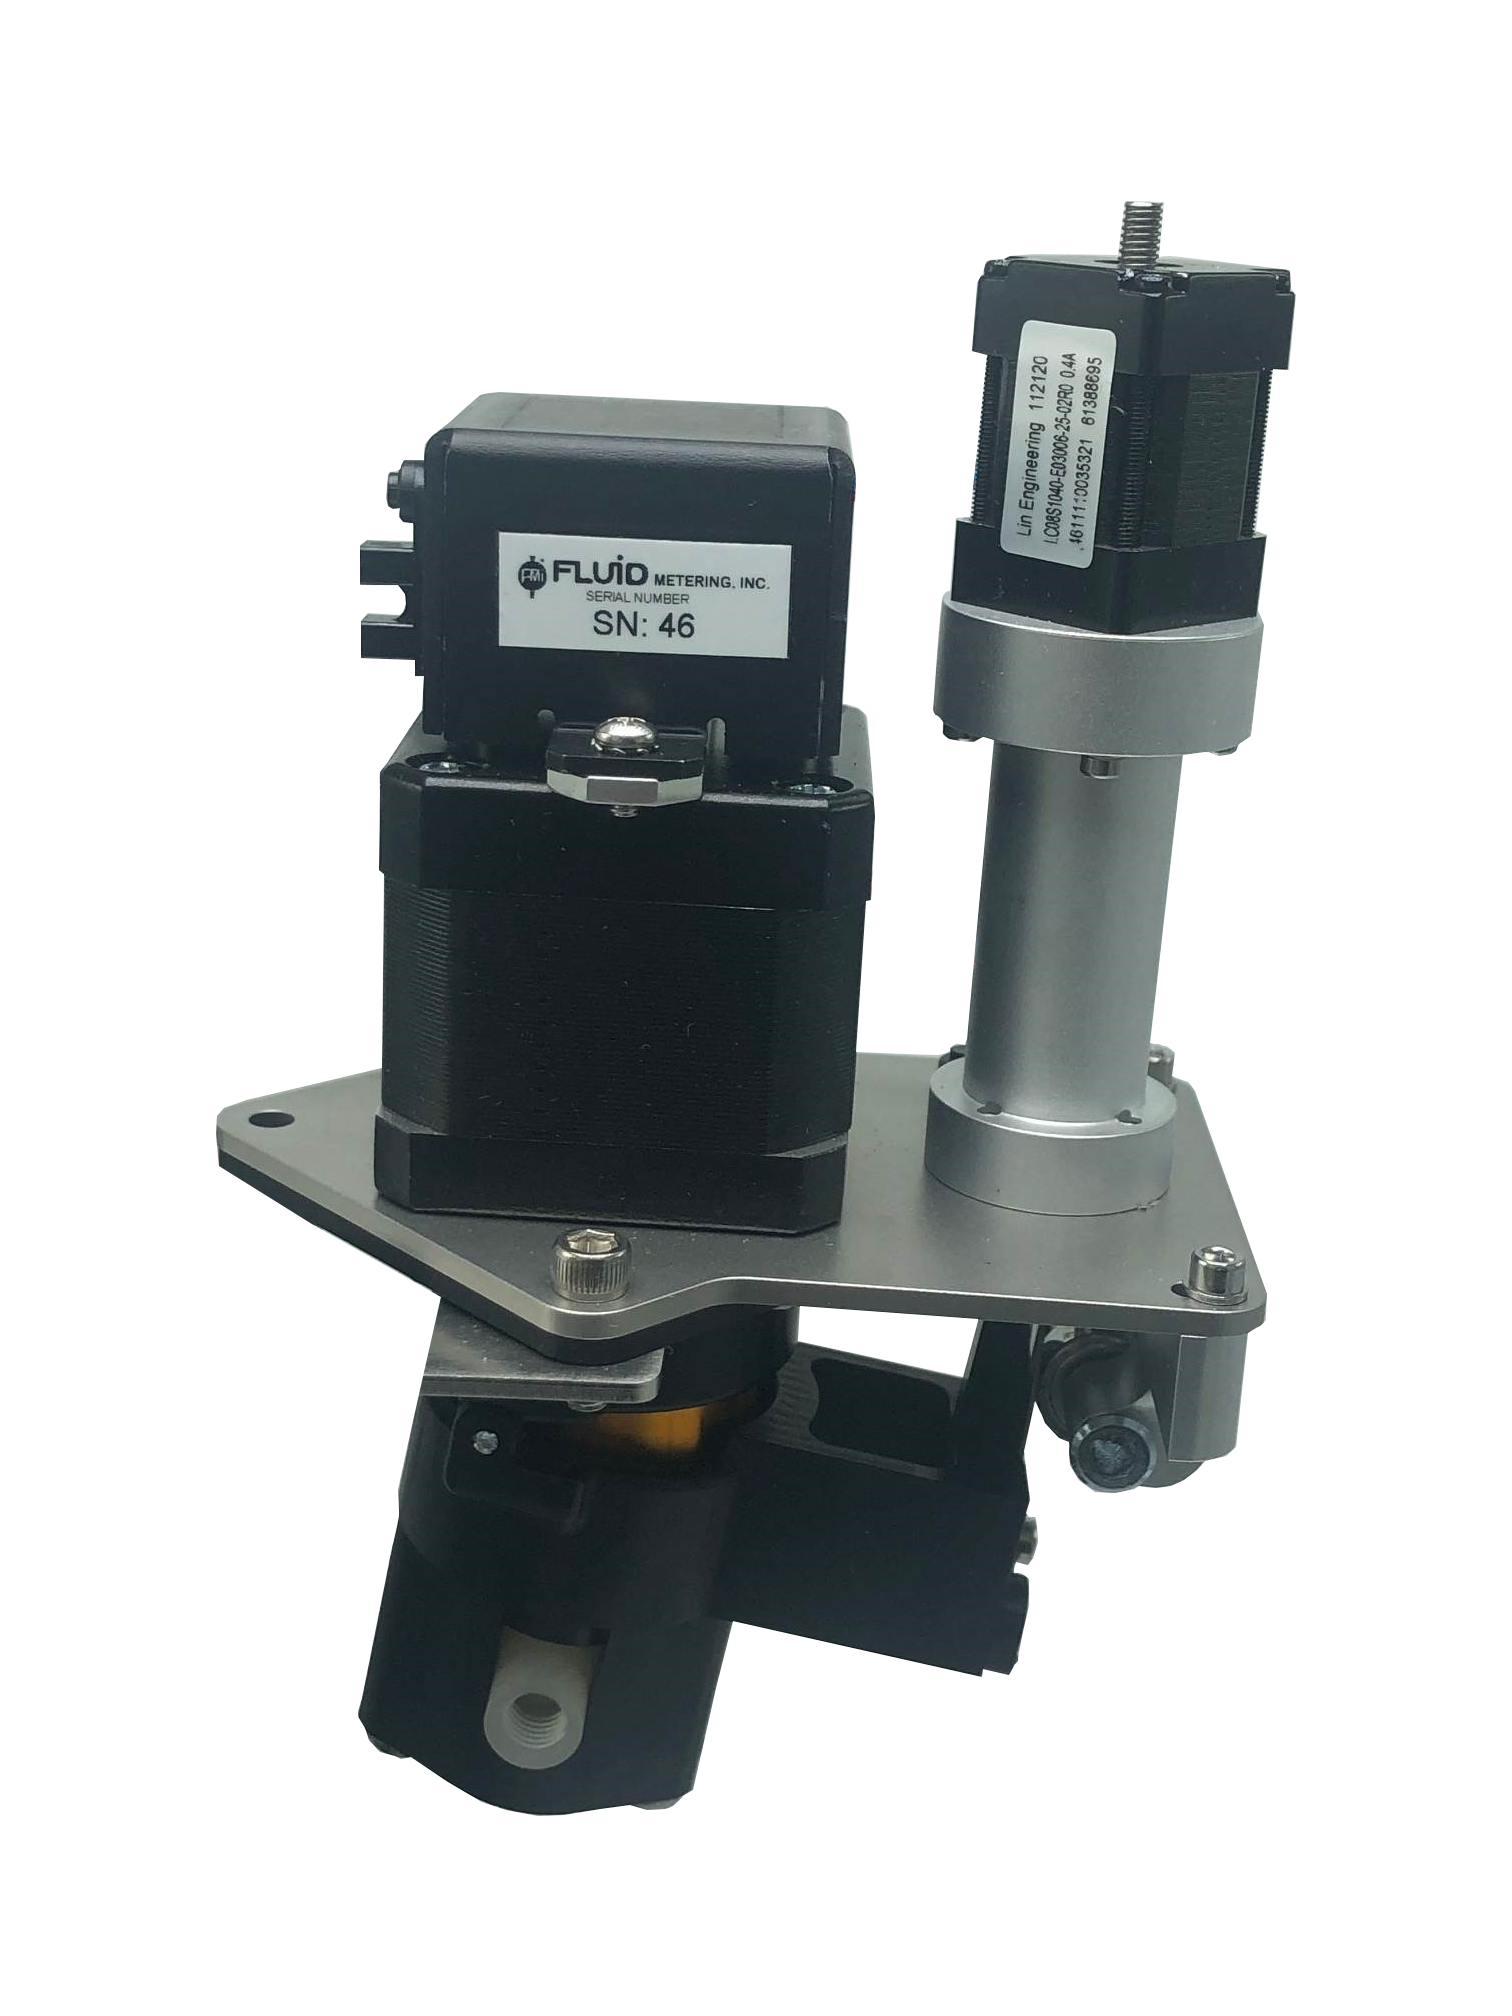 Fluid Metering Inc. Announces the Launch of the FVD Series of Variable Dispense Pumps